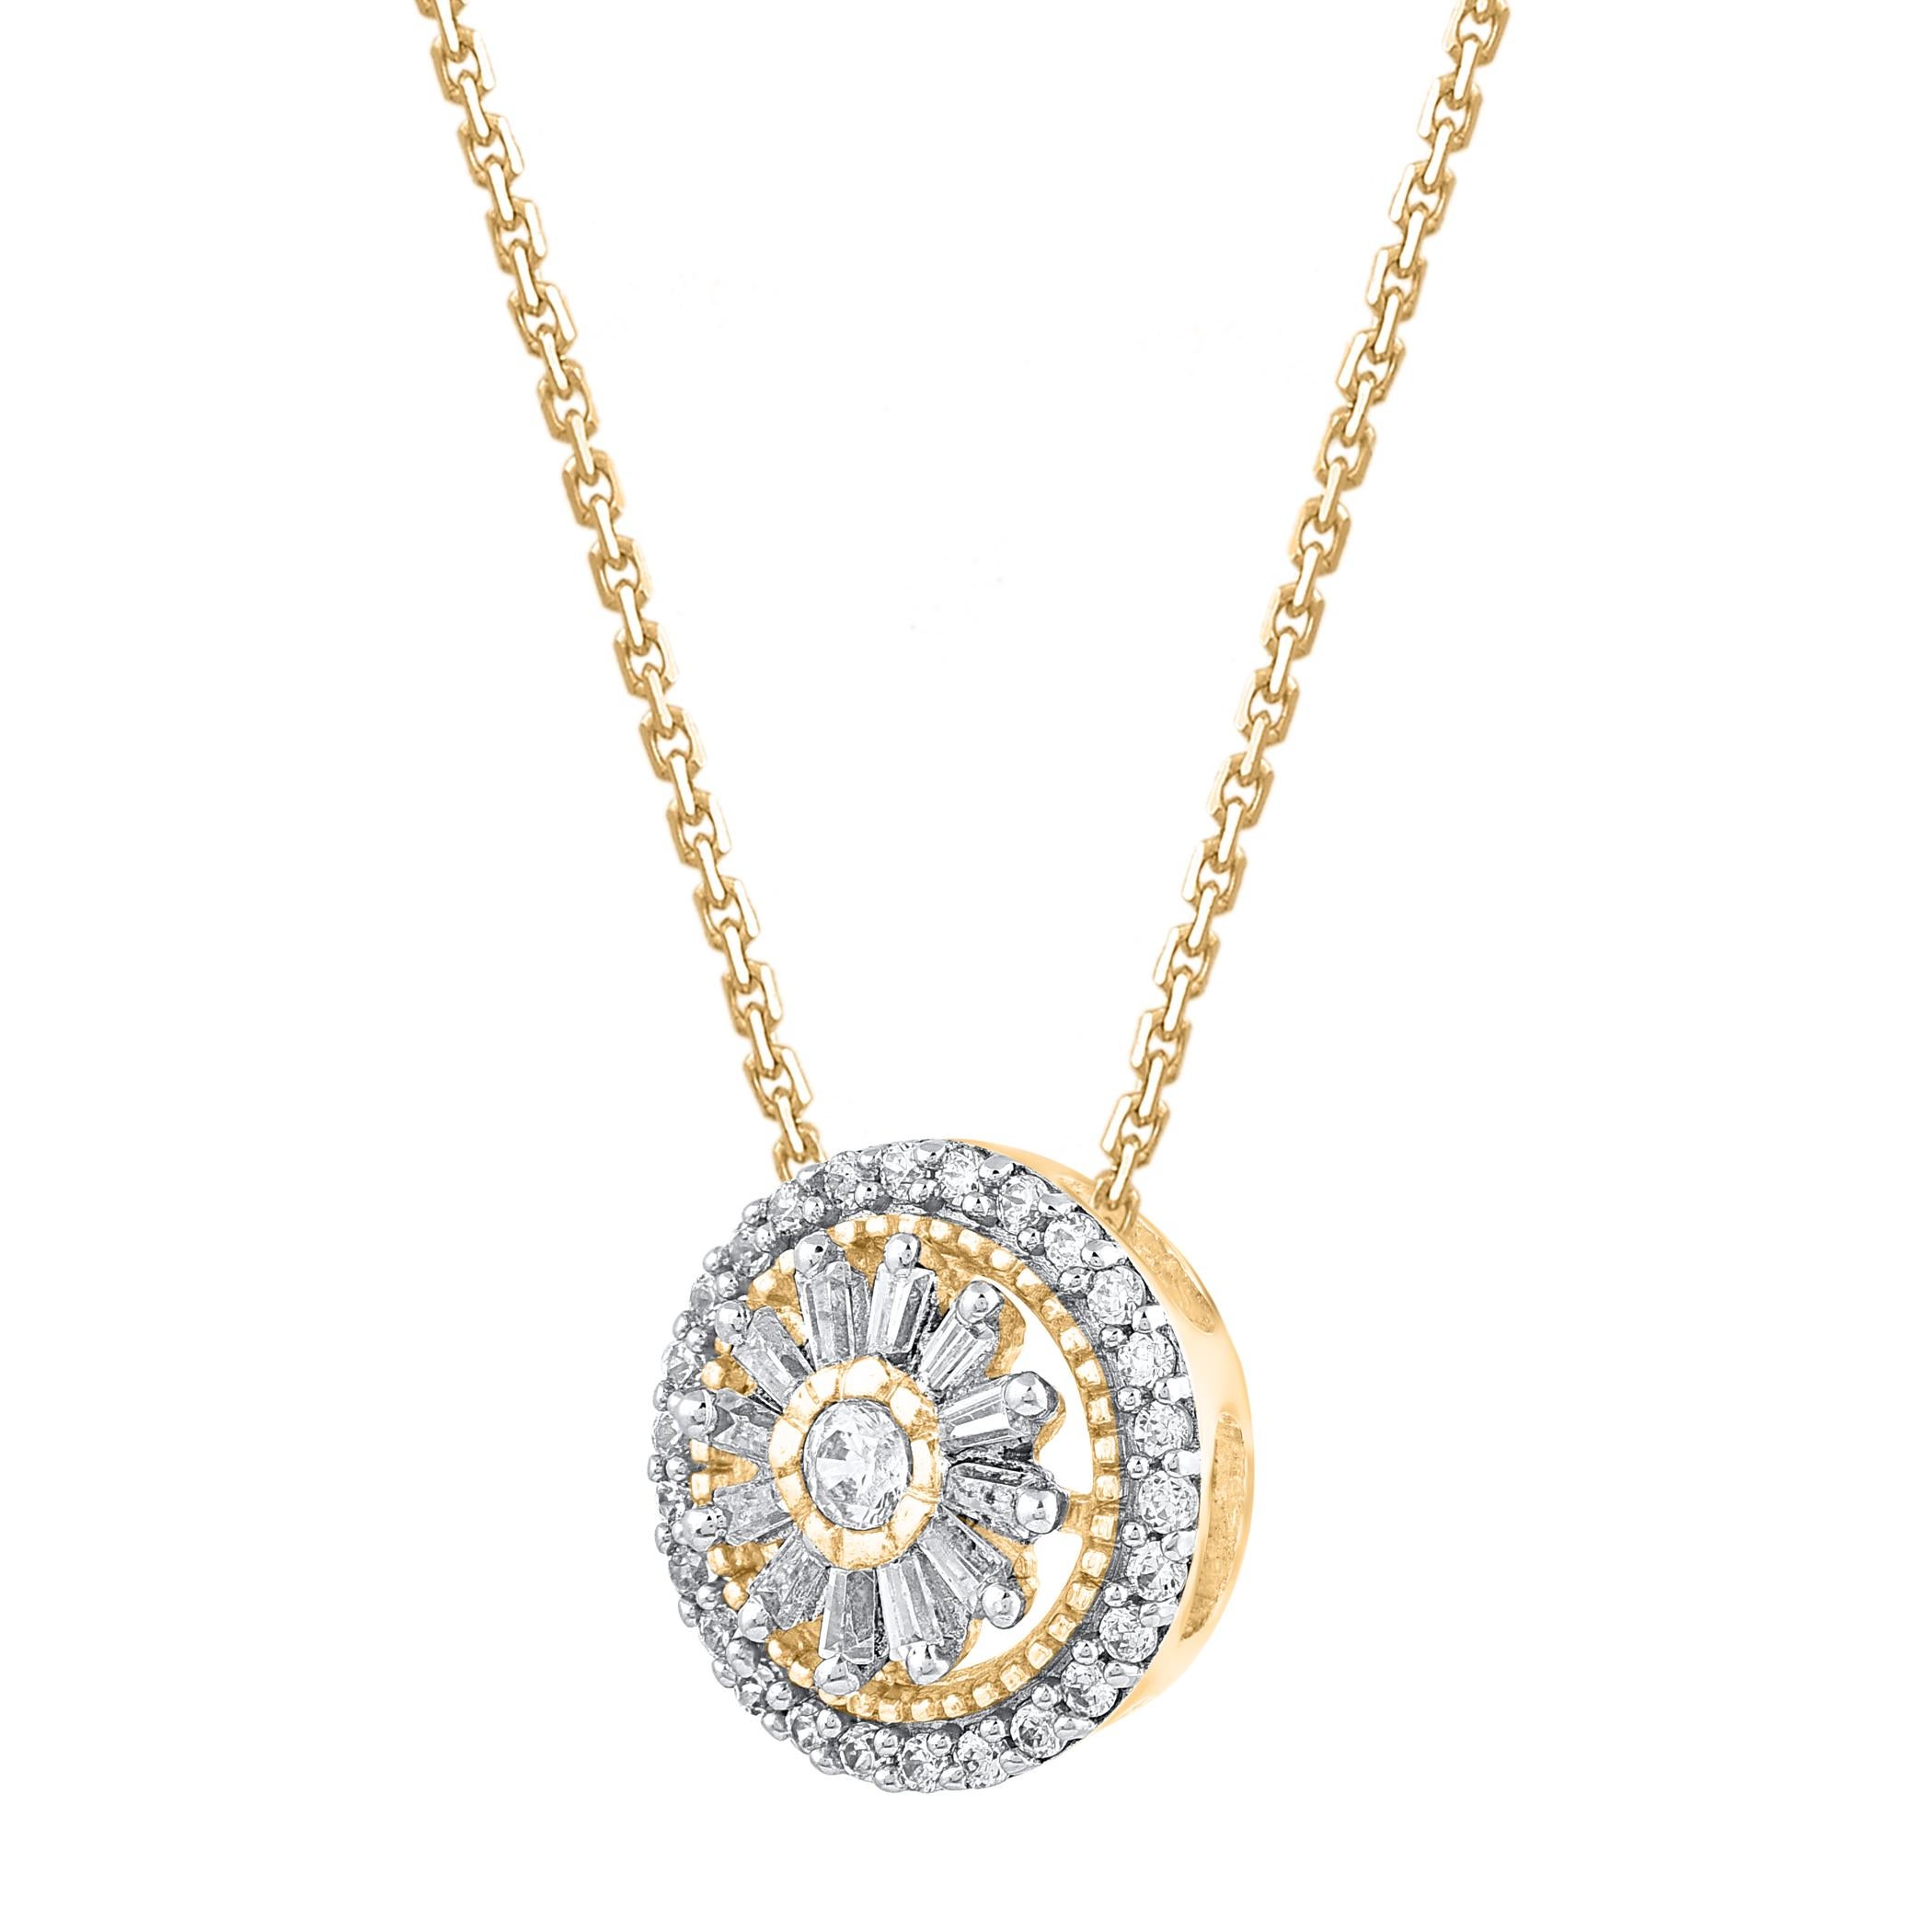 Make a brilliant statement with this sparkling diamond circle pendant. This pendant is crafted from 14-karat yellow gold and features 39 brilliant and baguette diamonds in prong & bezel setting, H-I color I-2 clarity and a high polish finish